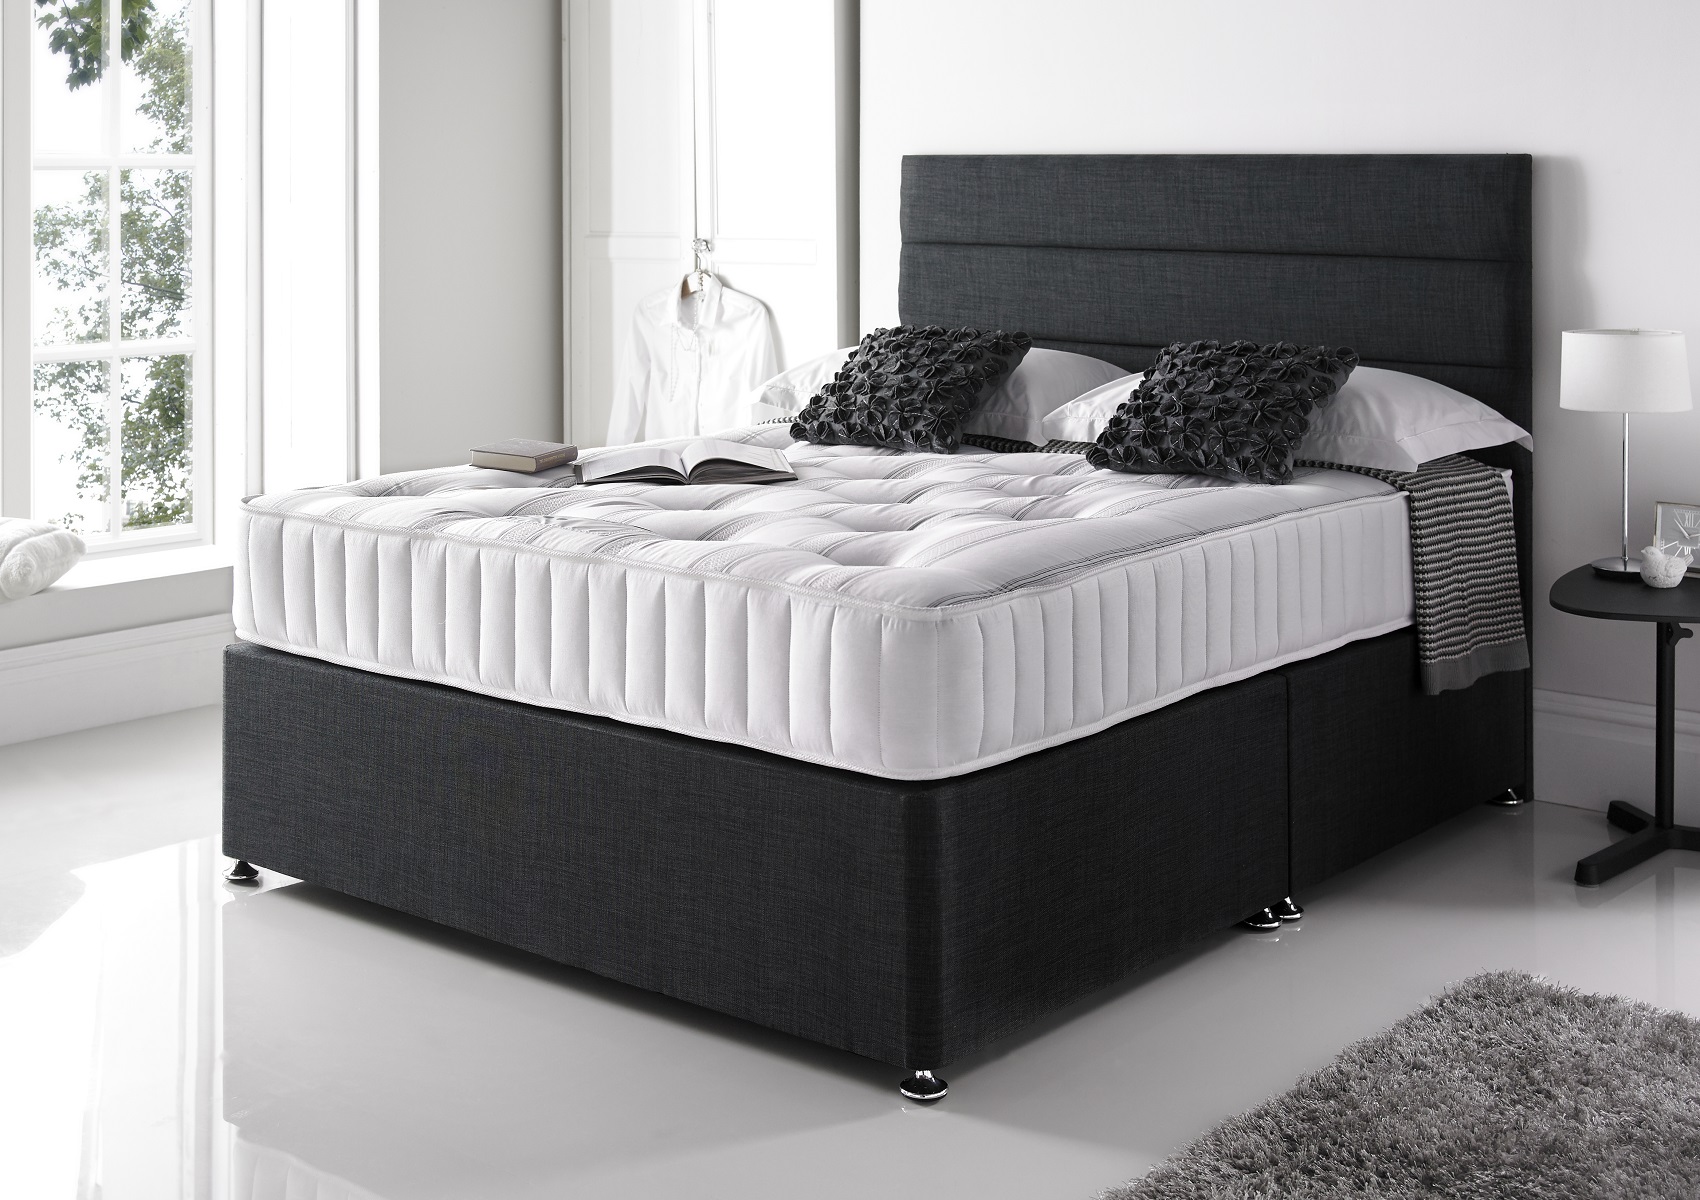 View Essentials Slate Upholstered Double Divan Bed Time4Sleep information